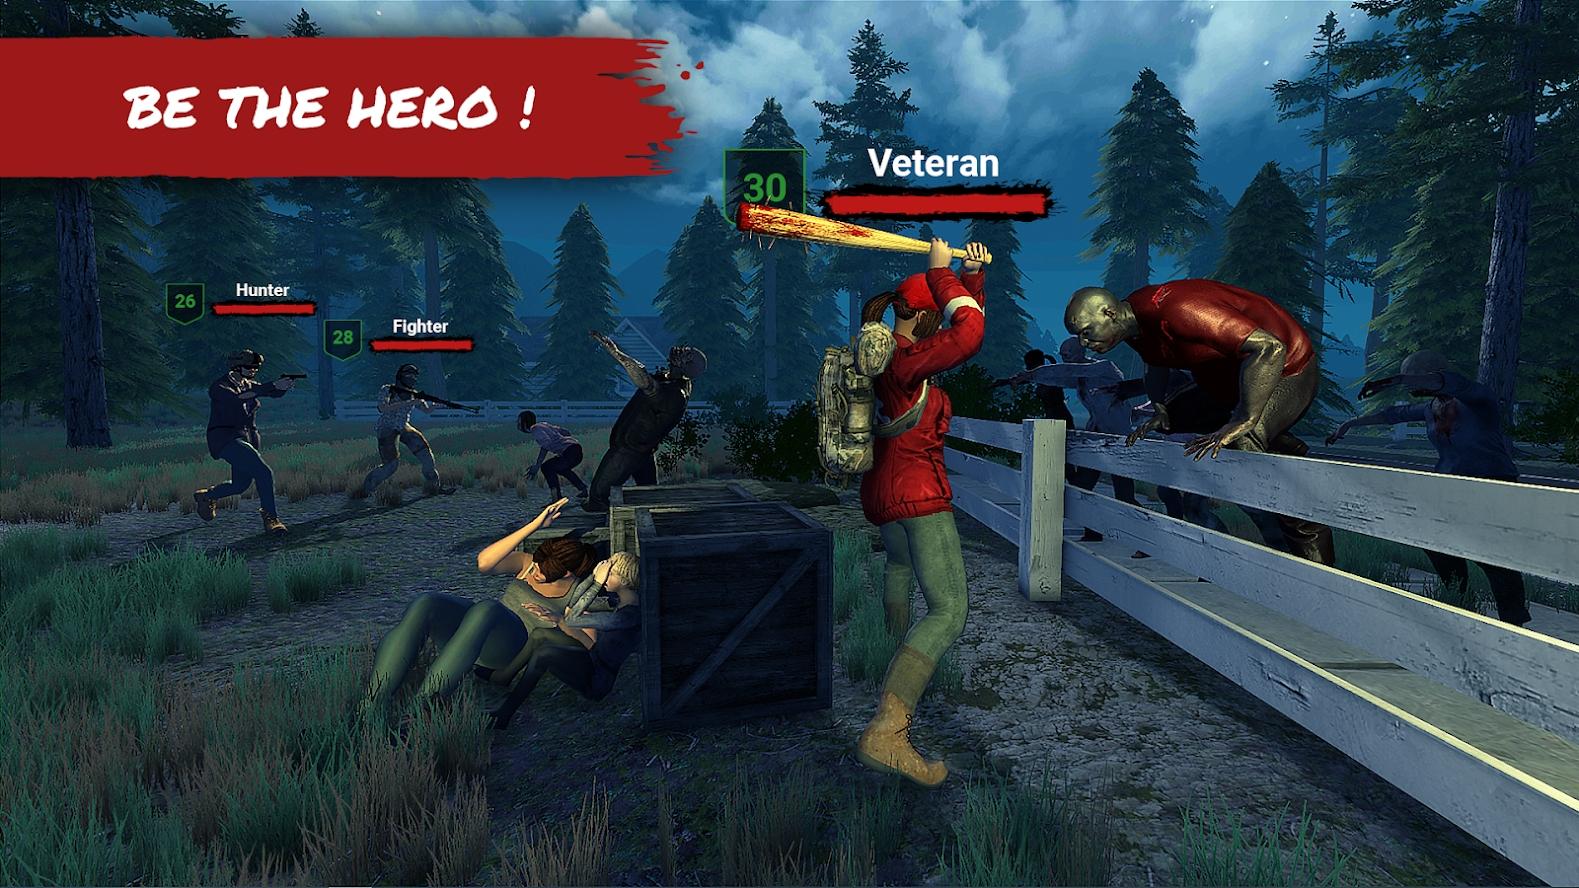 Игра зомби лес. Horror Forest 3: mmo RPG Zombie Survival.